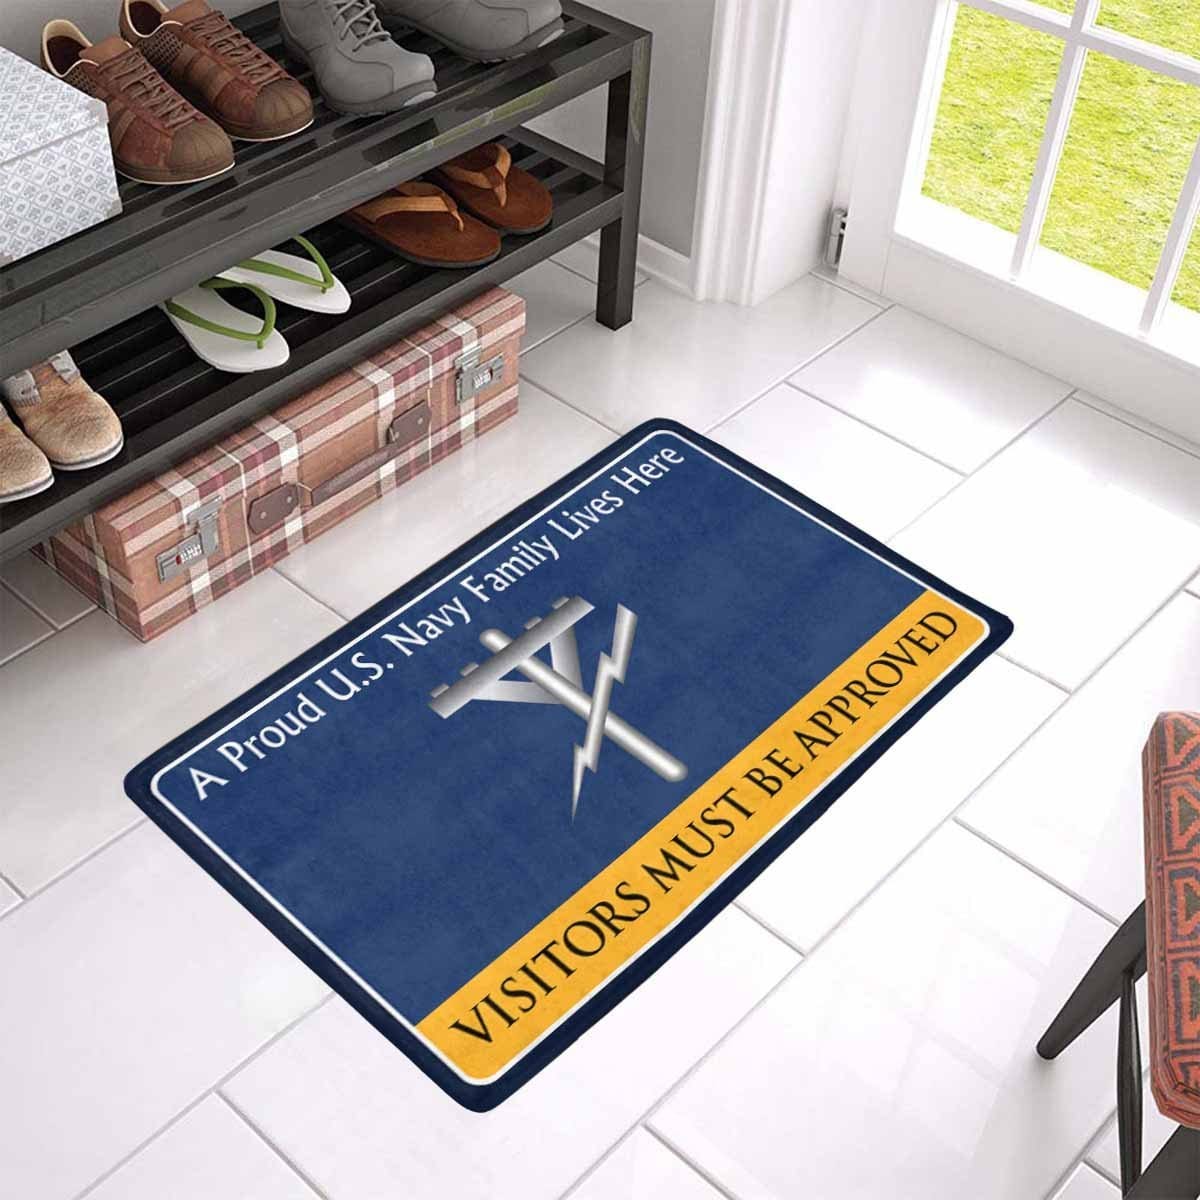 Navy Construction Electrician Navy CE Family Doormat - Visitors must be approved (23,6 inches x 15,7 inches)-Doormat-Navy-Rate-Veterans Nation